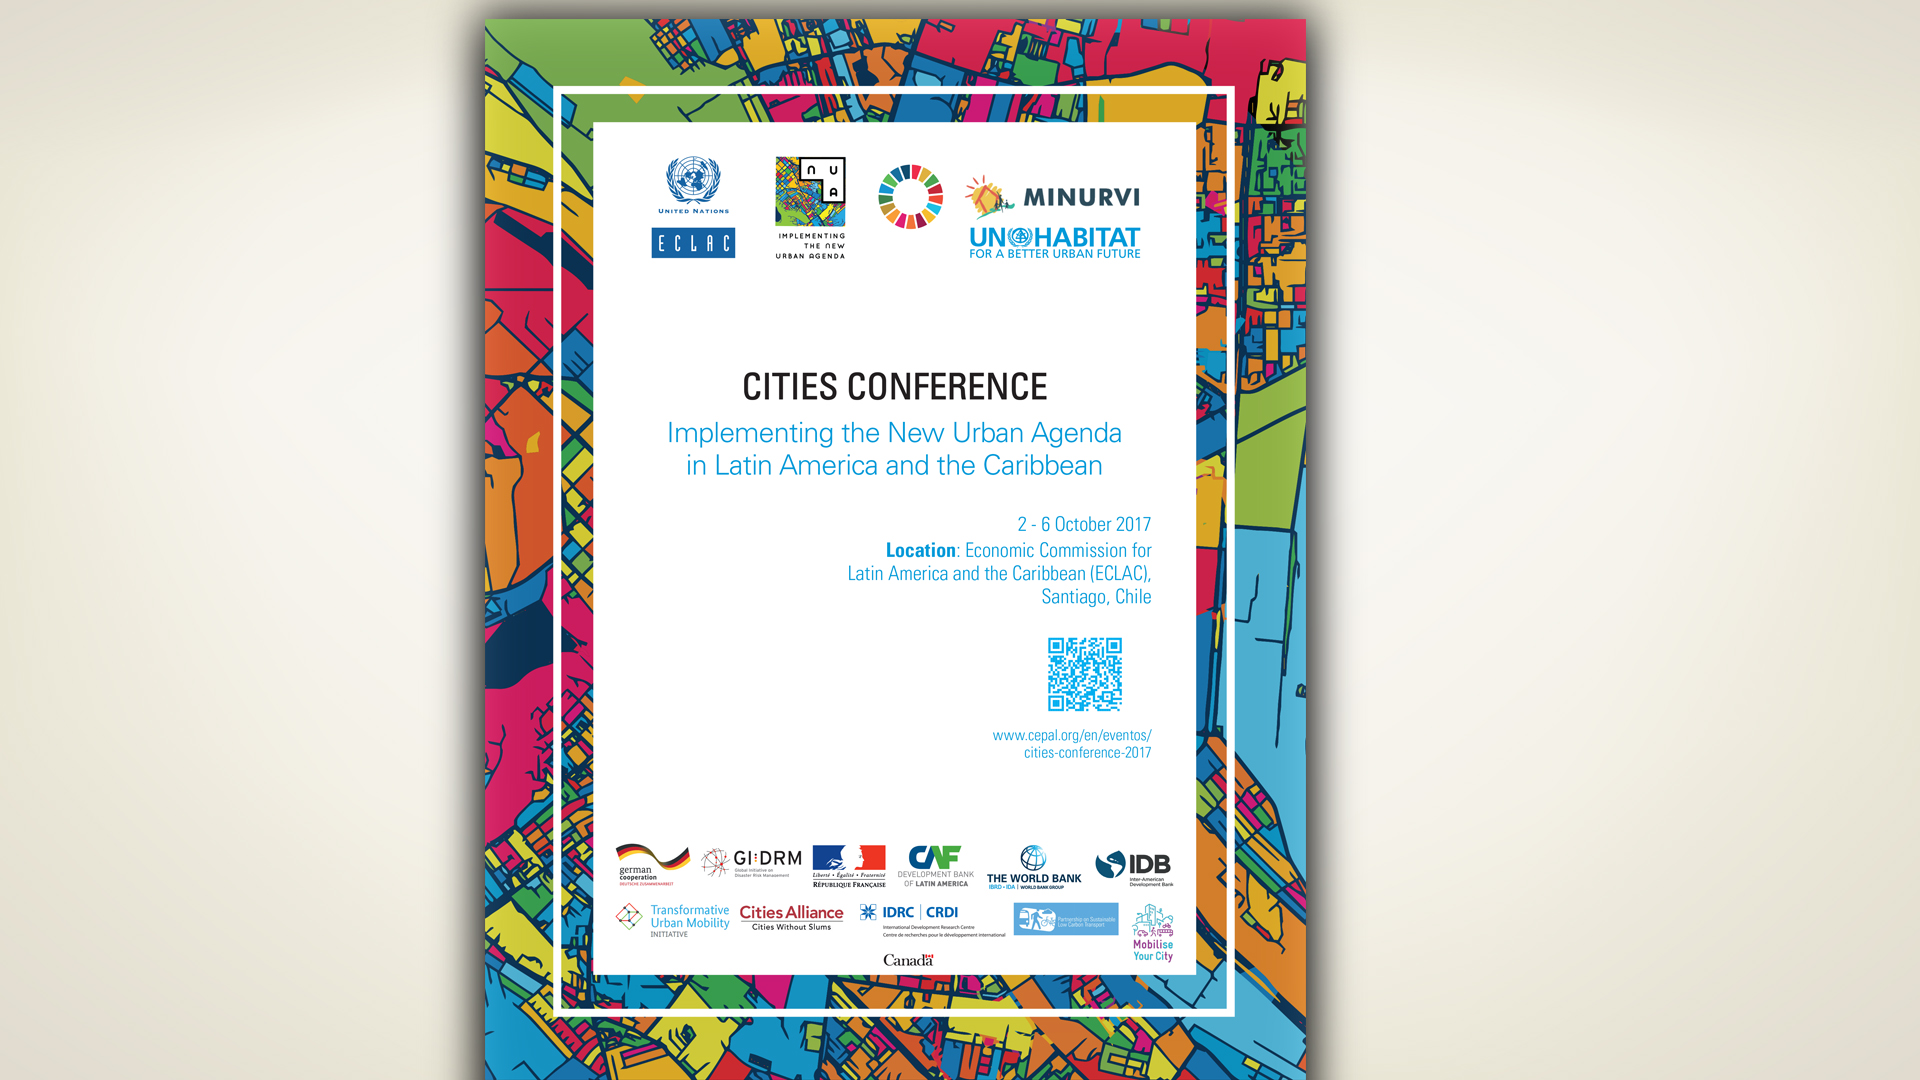 The Cities Conference flyer.